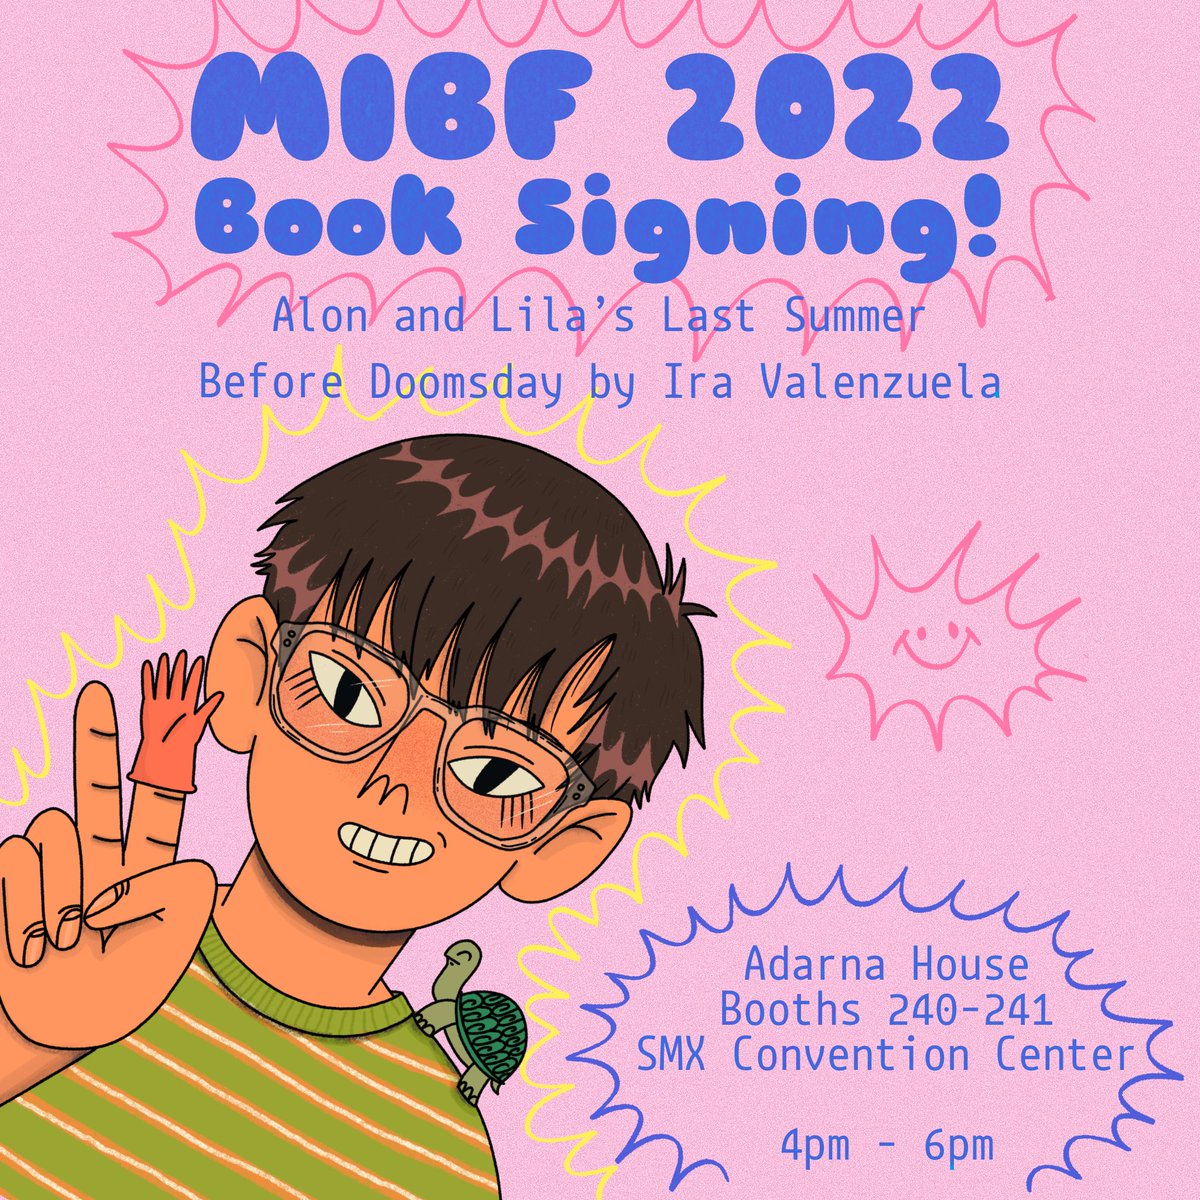 SEE YOU LATER at MIBF 2022 for book signing of "Alon and Lila's Last Summer Before Doomsday" with the author, Ira Valenzuela 🌊💜

Adarna House booths 240-241, SMX Convention Center! I will be there at 4pm to 6pm 🌈 #MIBF2022 